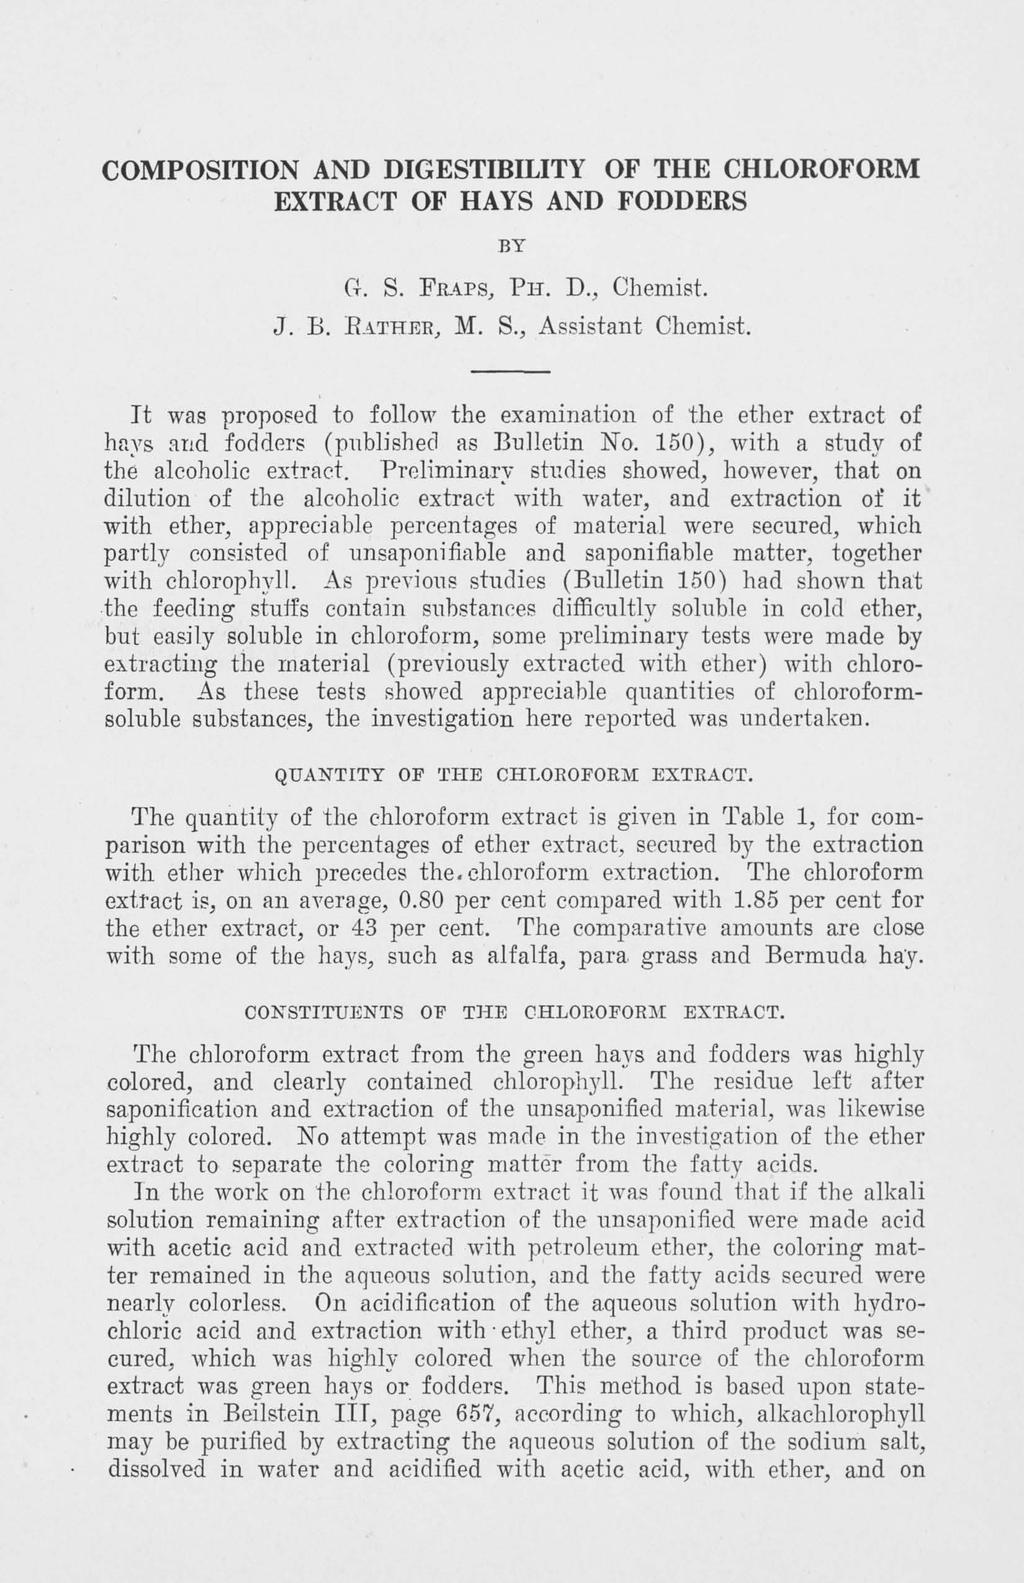 COMPOSITION AND DIGESTIBILITY OF THE CHLOROFORM EXTRACT OF HAYS AND FODDERS BY Ci. S. F r a p s, P H. D., Chemist. J. B. BATHER, M. S., Assistant Chemist.